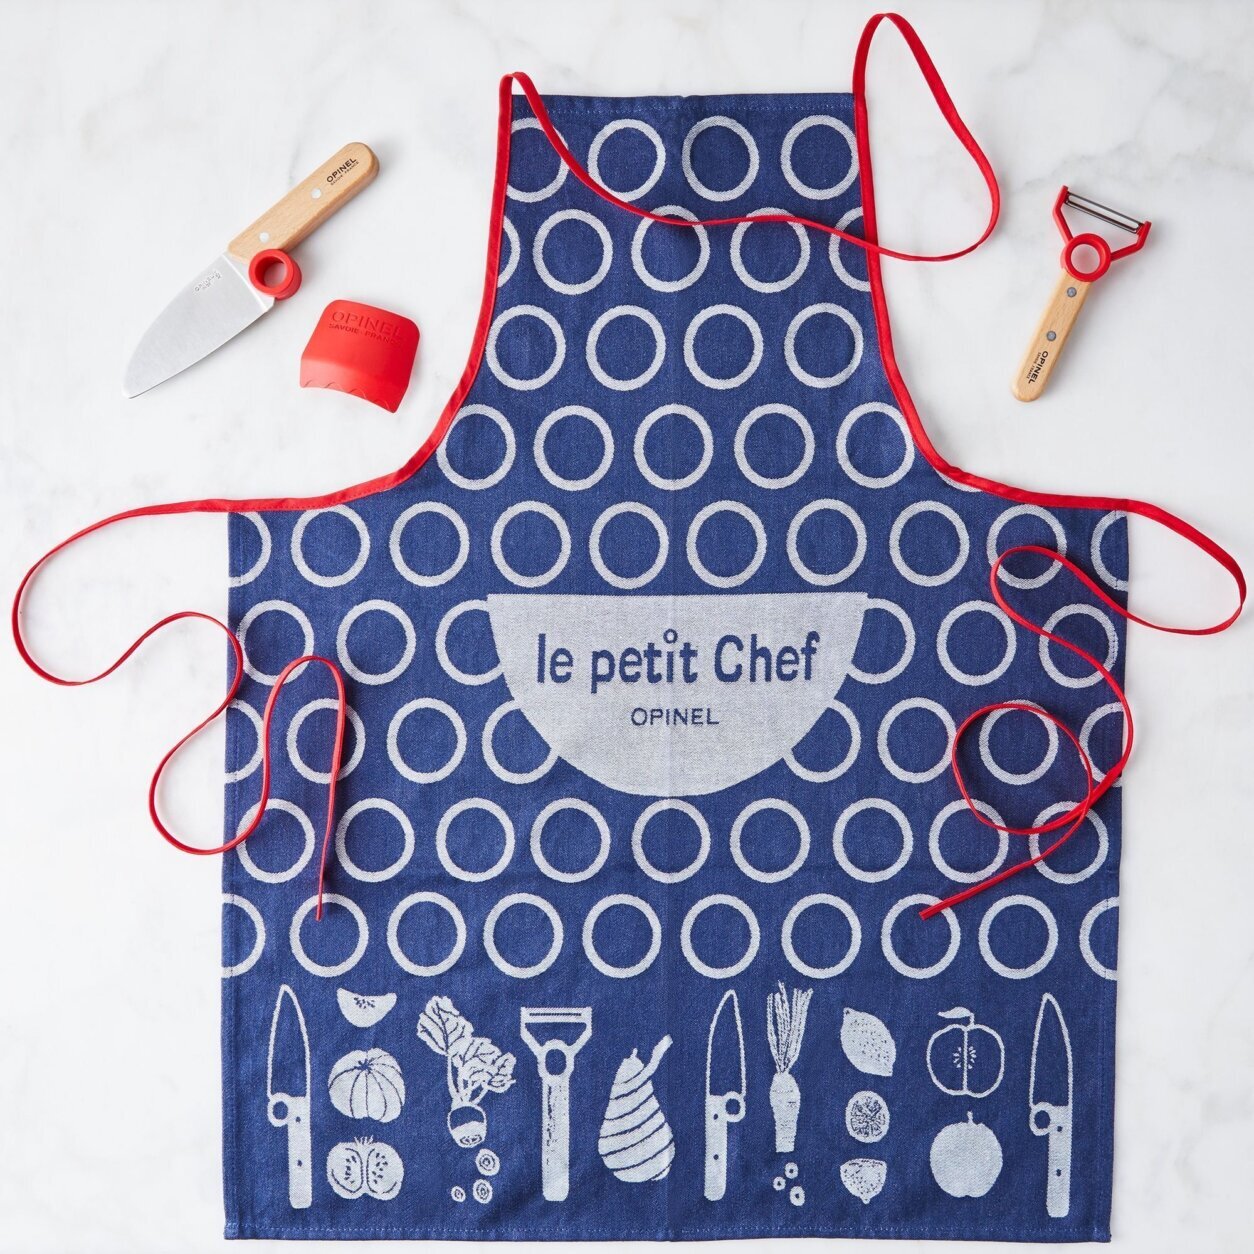 Gear to get kids cooking — for real or